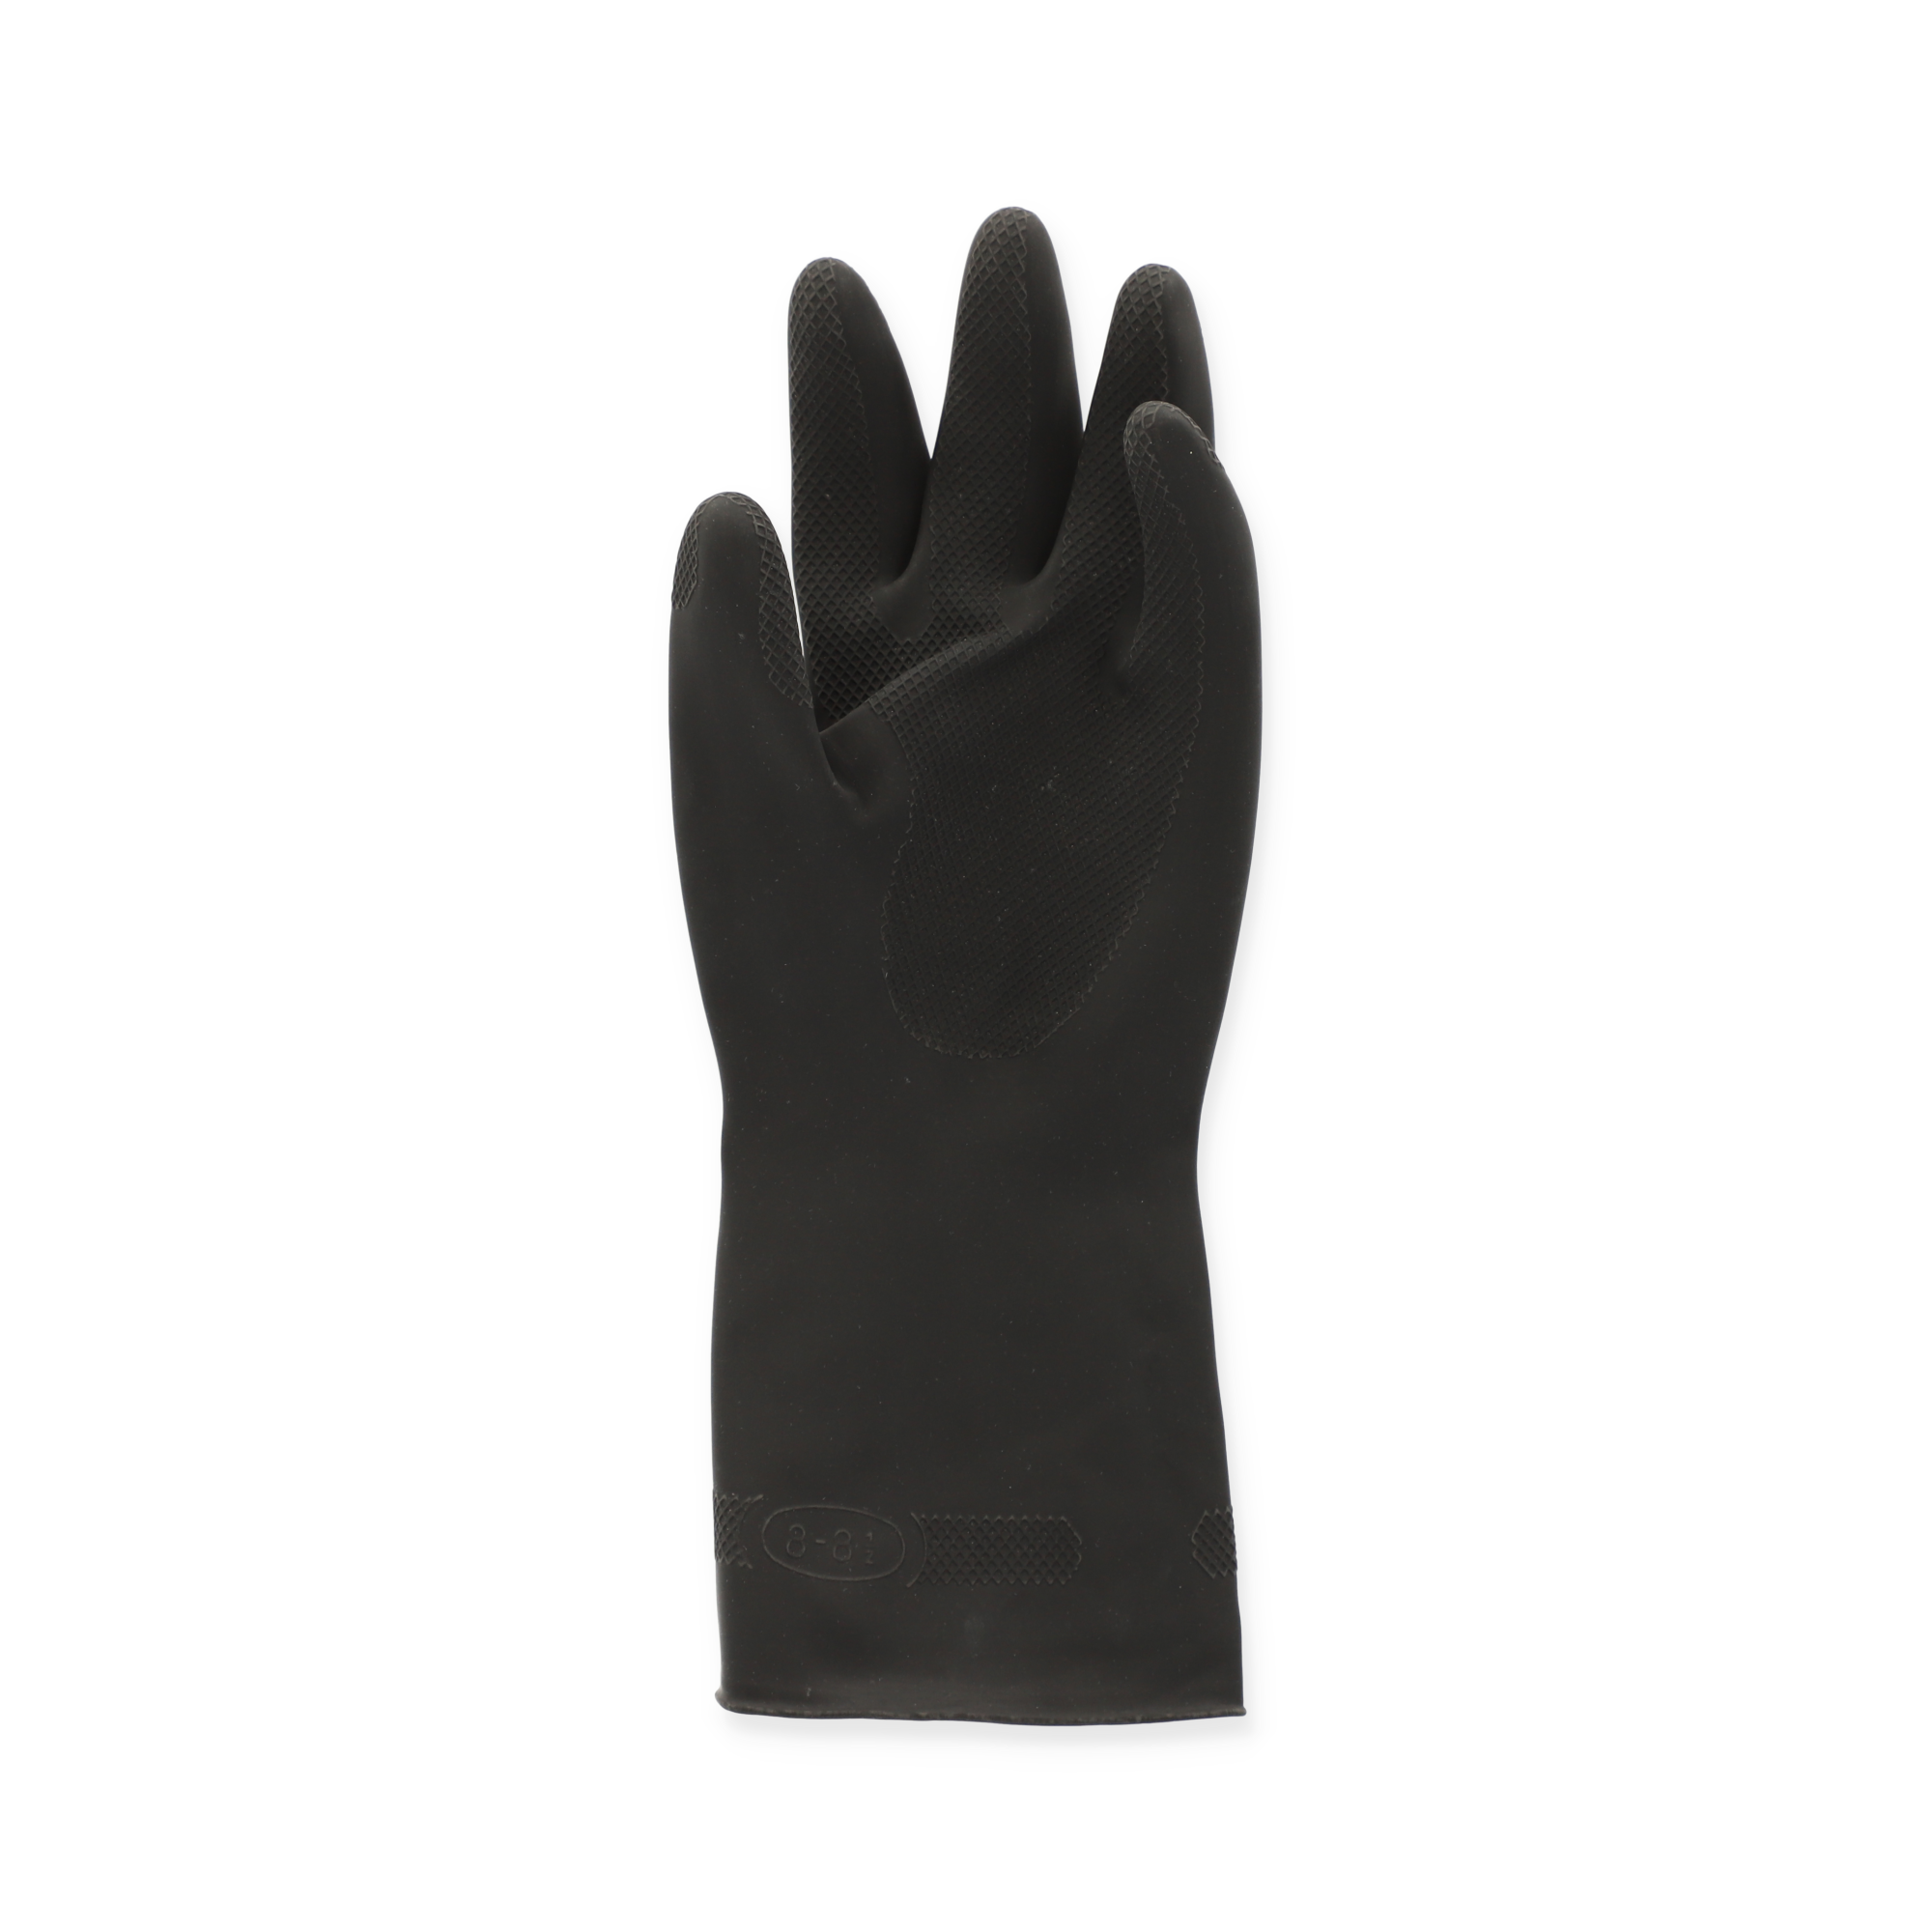 Handschuhe 'Chemical Comfort 6300' schwarz Gr. 10 + product picture